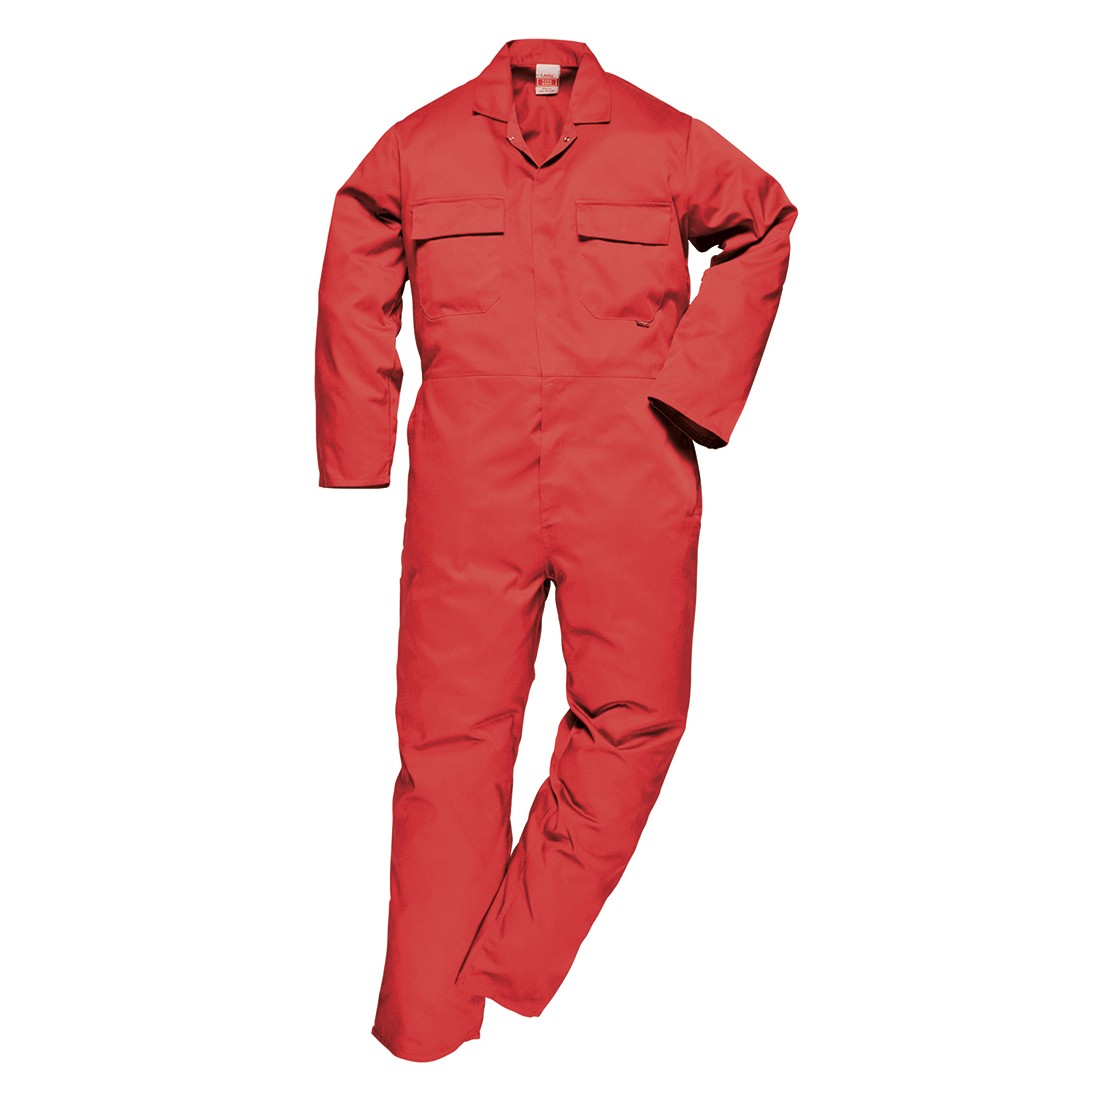 S999RERXL Euro Work Polycotton Coverall - Red, XL -  Portwest